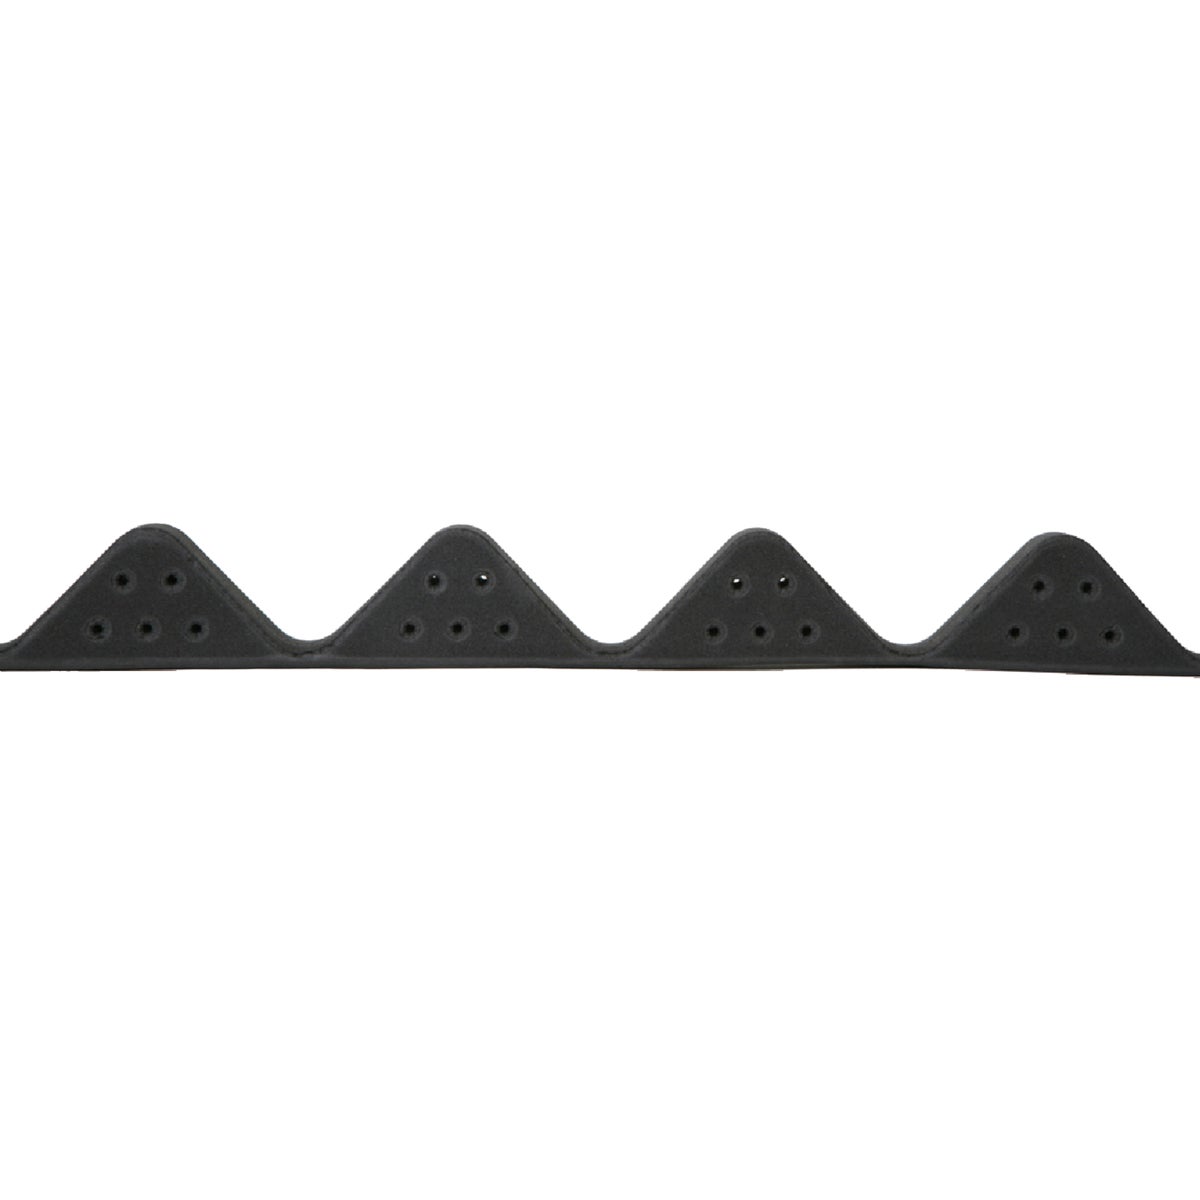 Item 121088, For use with the Ondura Corrugated Asphalt Roofing System.